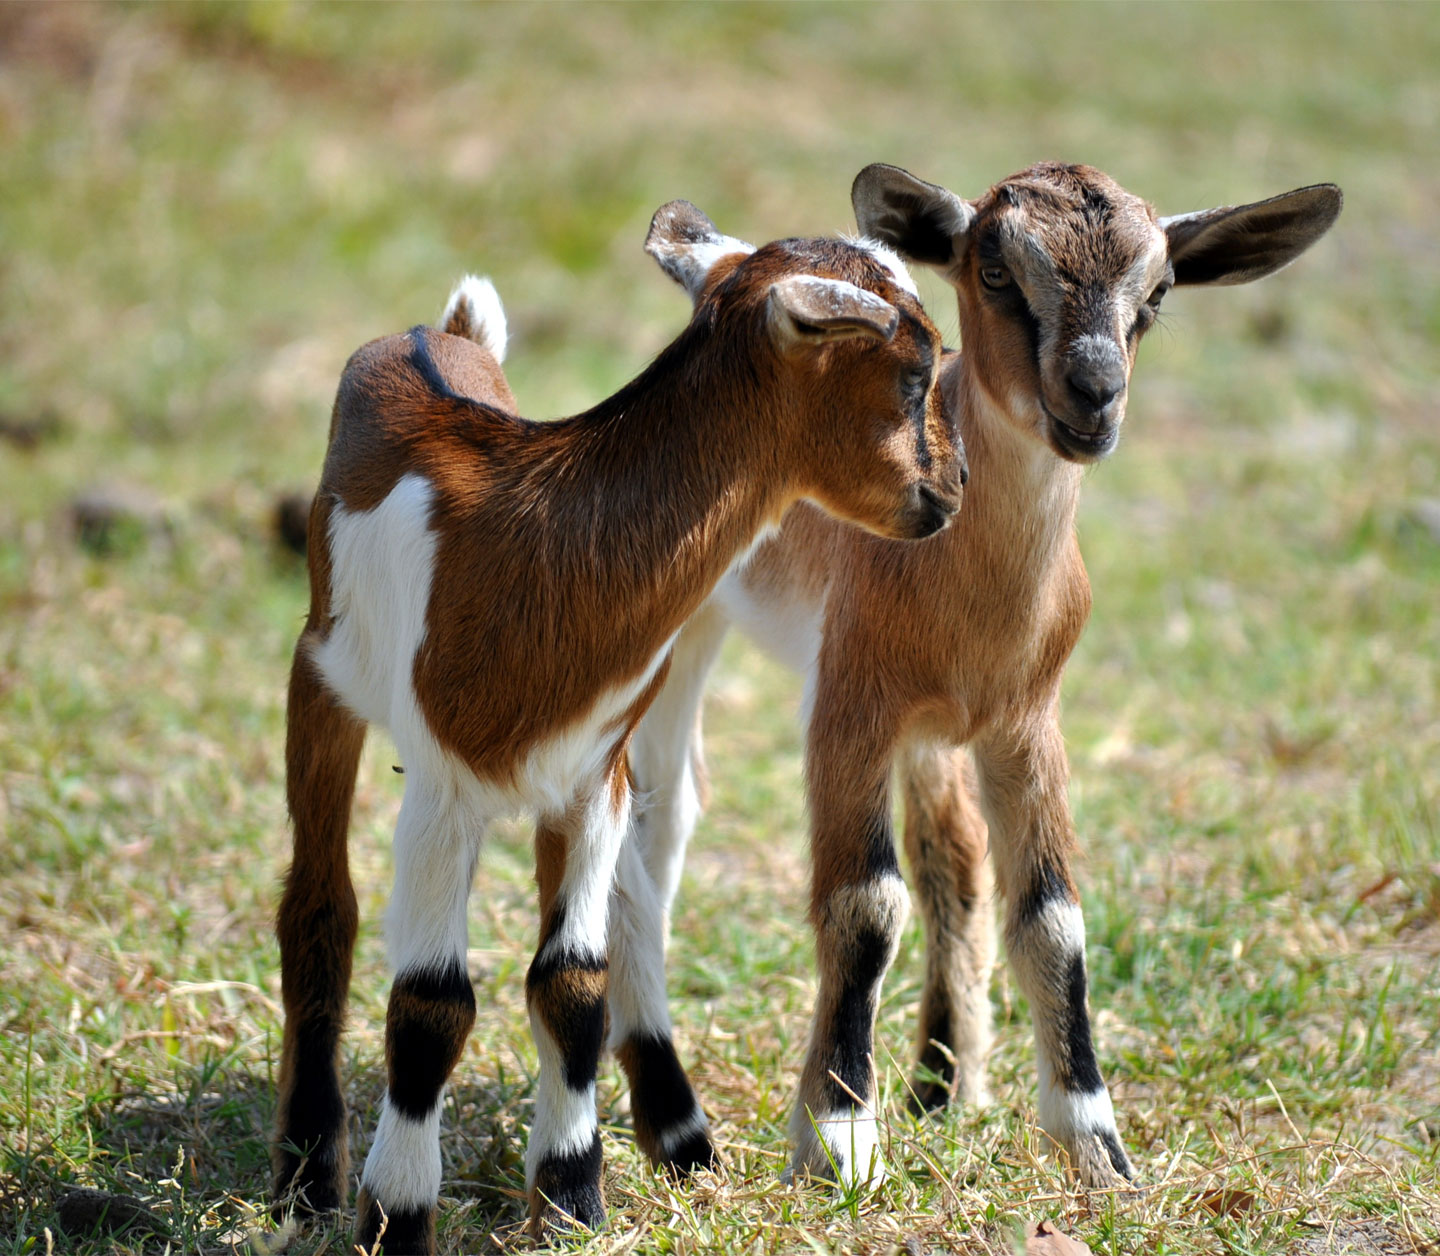 Two goat kids in a grassy area